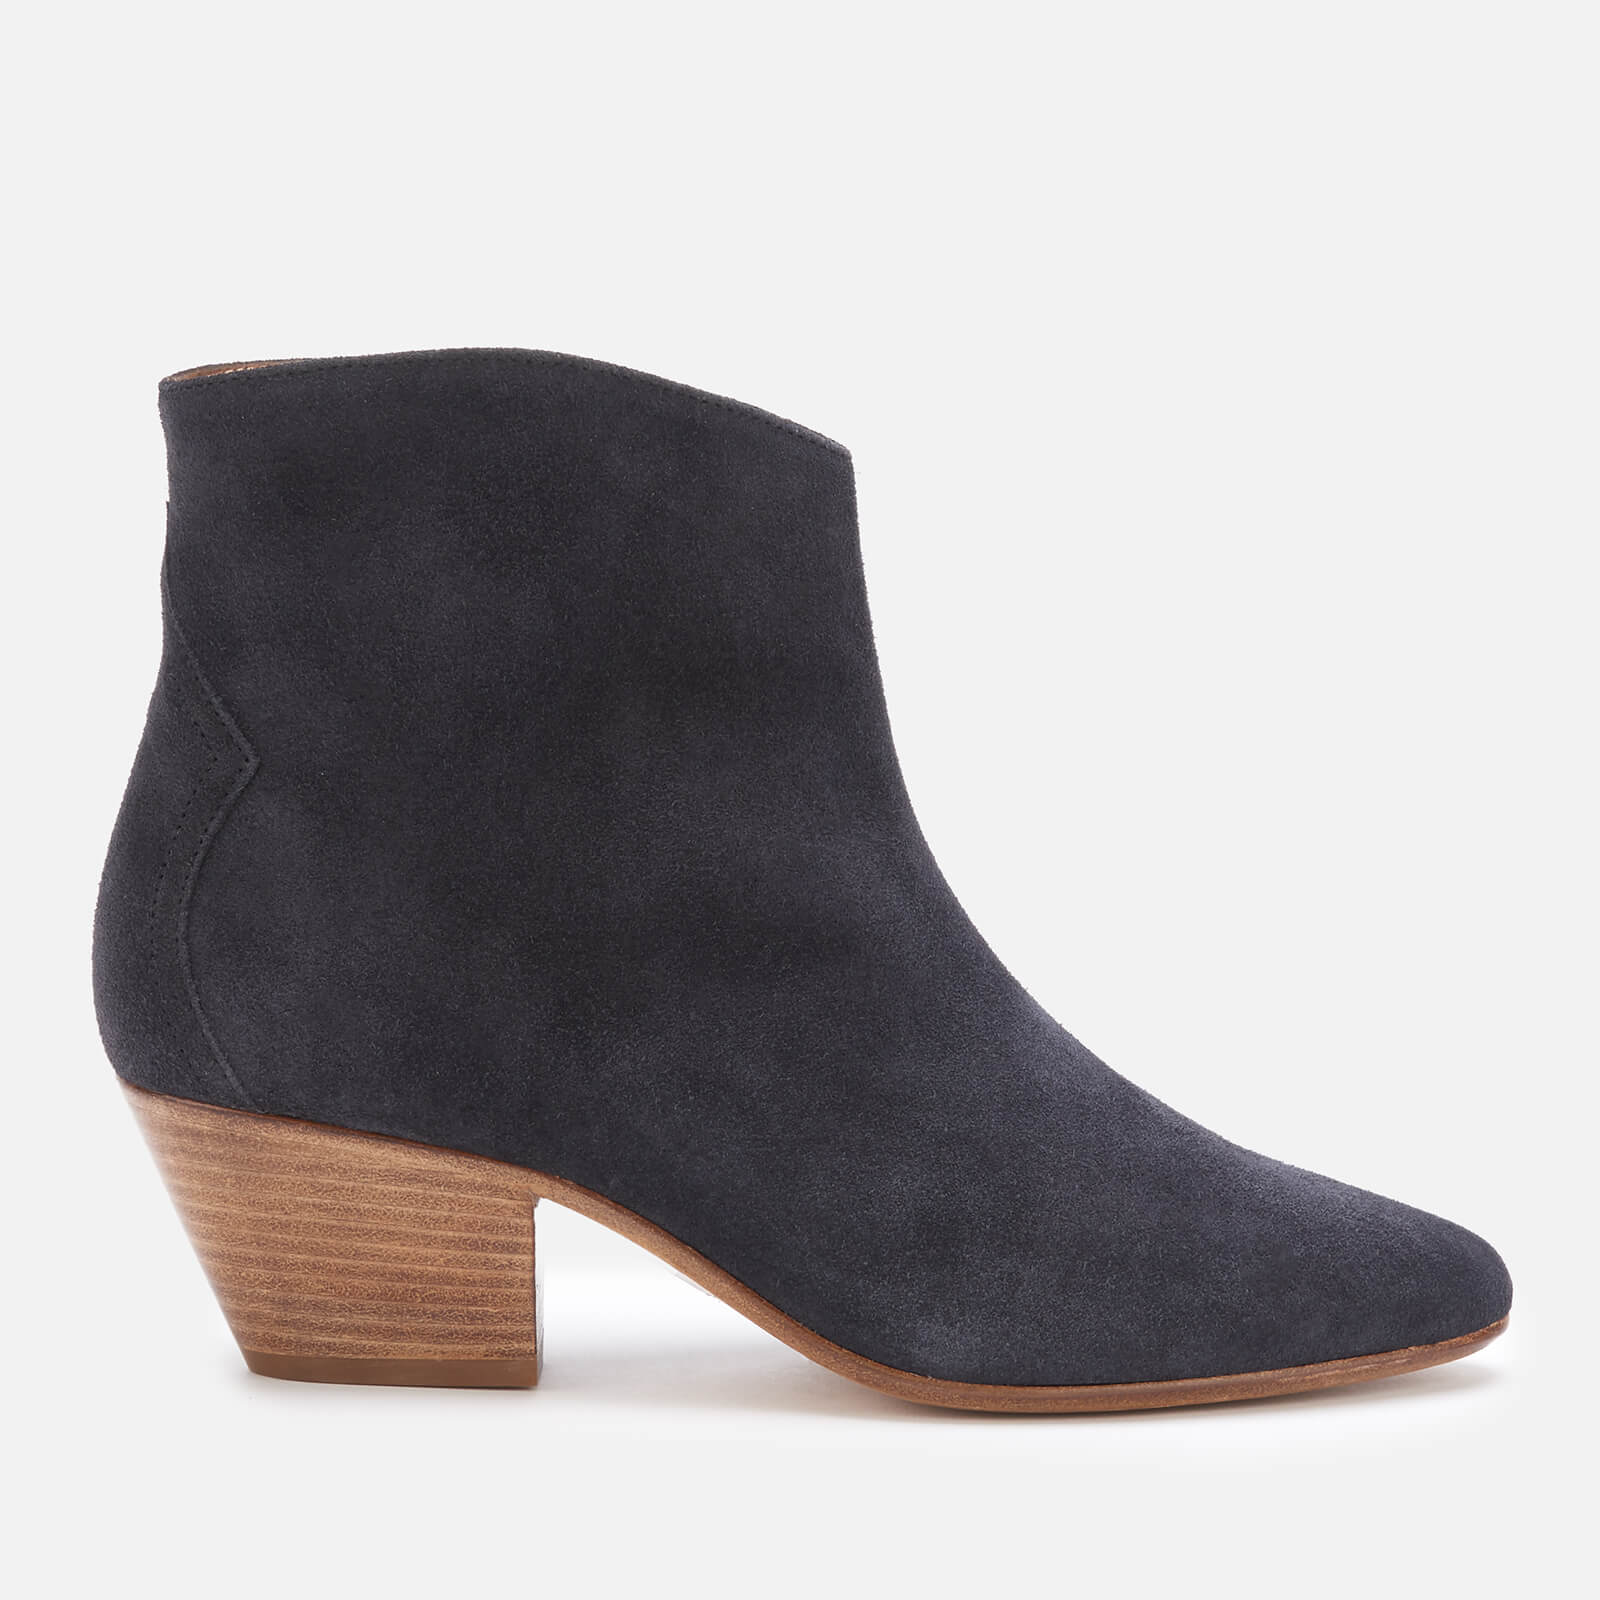 Isabel Marant Women's Dacken Suede Heeled Ankle Boots - Faded Black - UK 4